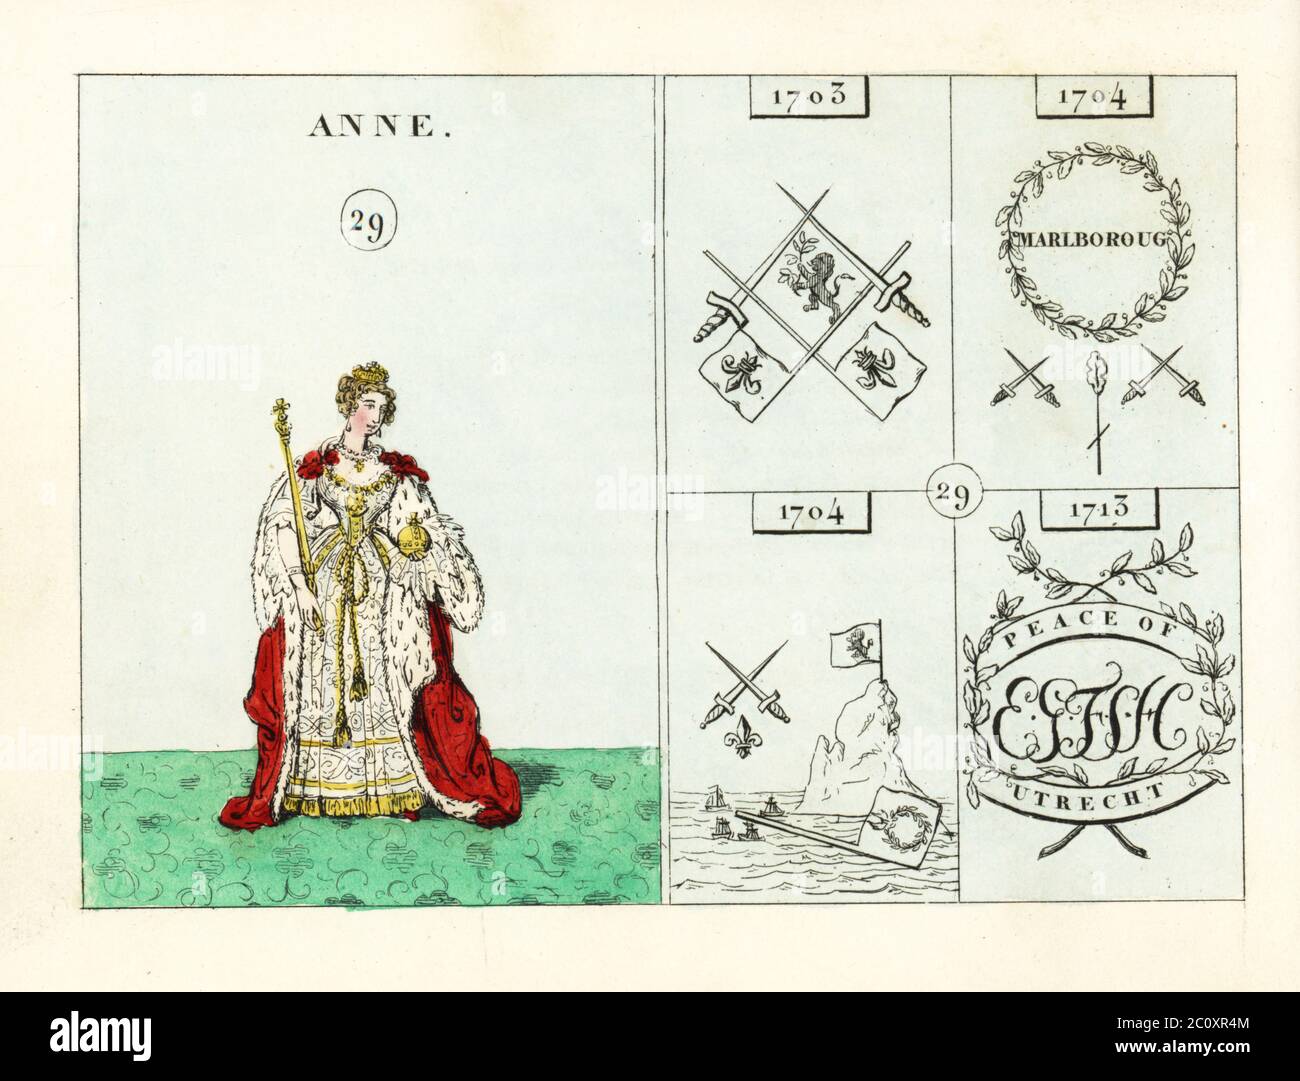 Portrait of Queen Anne of England, In crown, ermine mantle, white and gold dress, with orb and sceptre. Emblems indicate the French War, victories of Marlborough, Sir George Rooke takes Gibraltar, and Peace of Utrecht. Handcoloured steel engraving after an illustration by Mary Ann Rundall from A Symbolical History of England, from Early Times to the Reign of William IV, J.H. Truchy, Paris, 1839. Mary Ann Rundall was a teacher of young ladies in Bath, and published her book of mnemonic emblems in 1815. Stock Photo